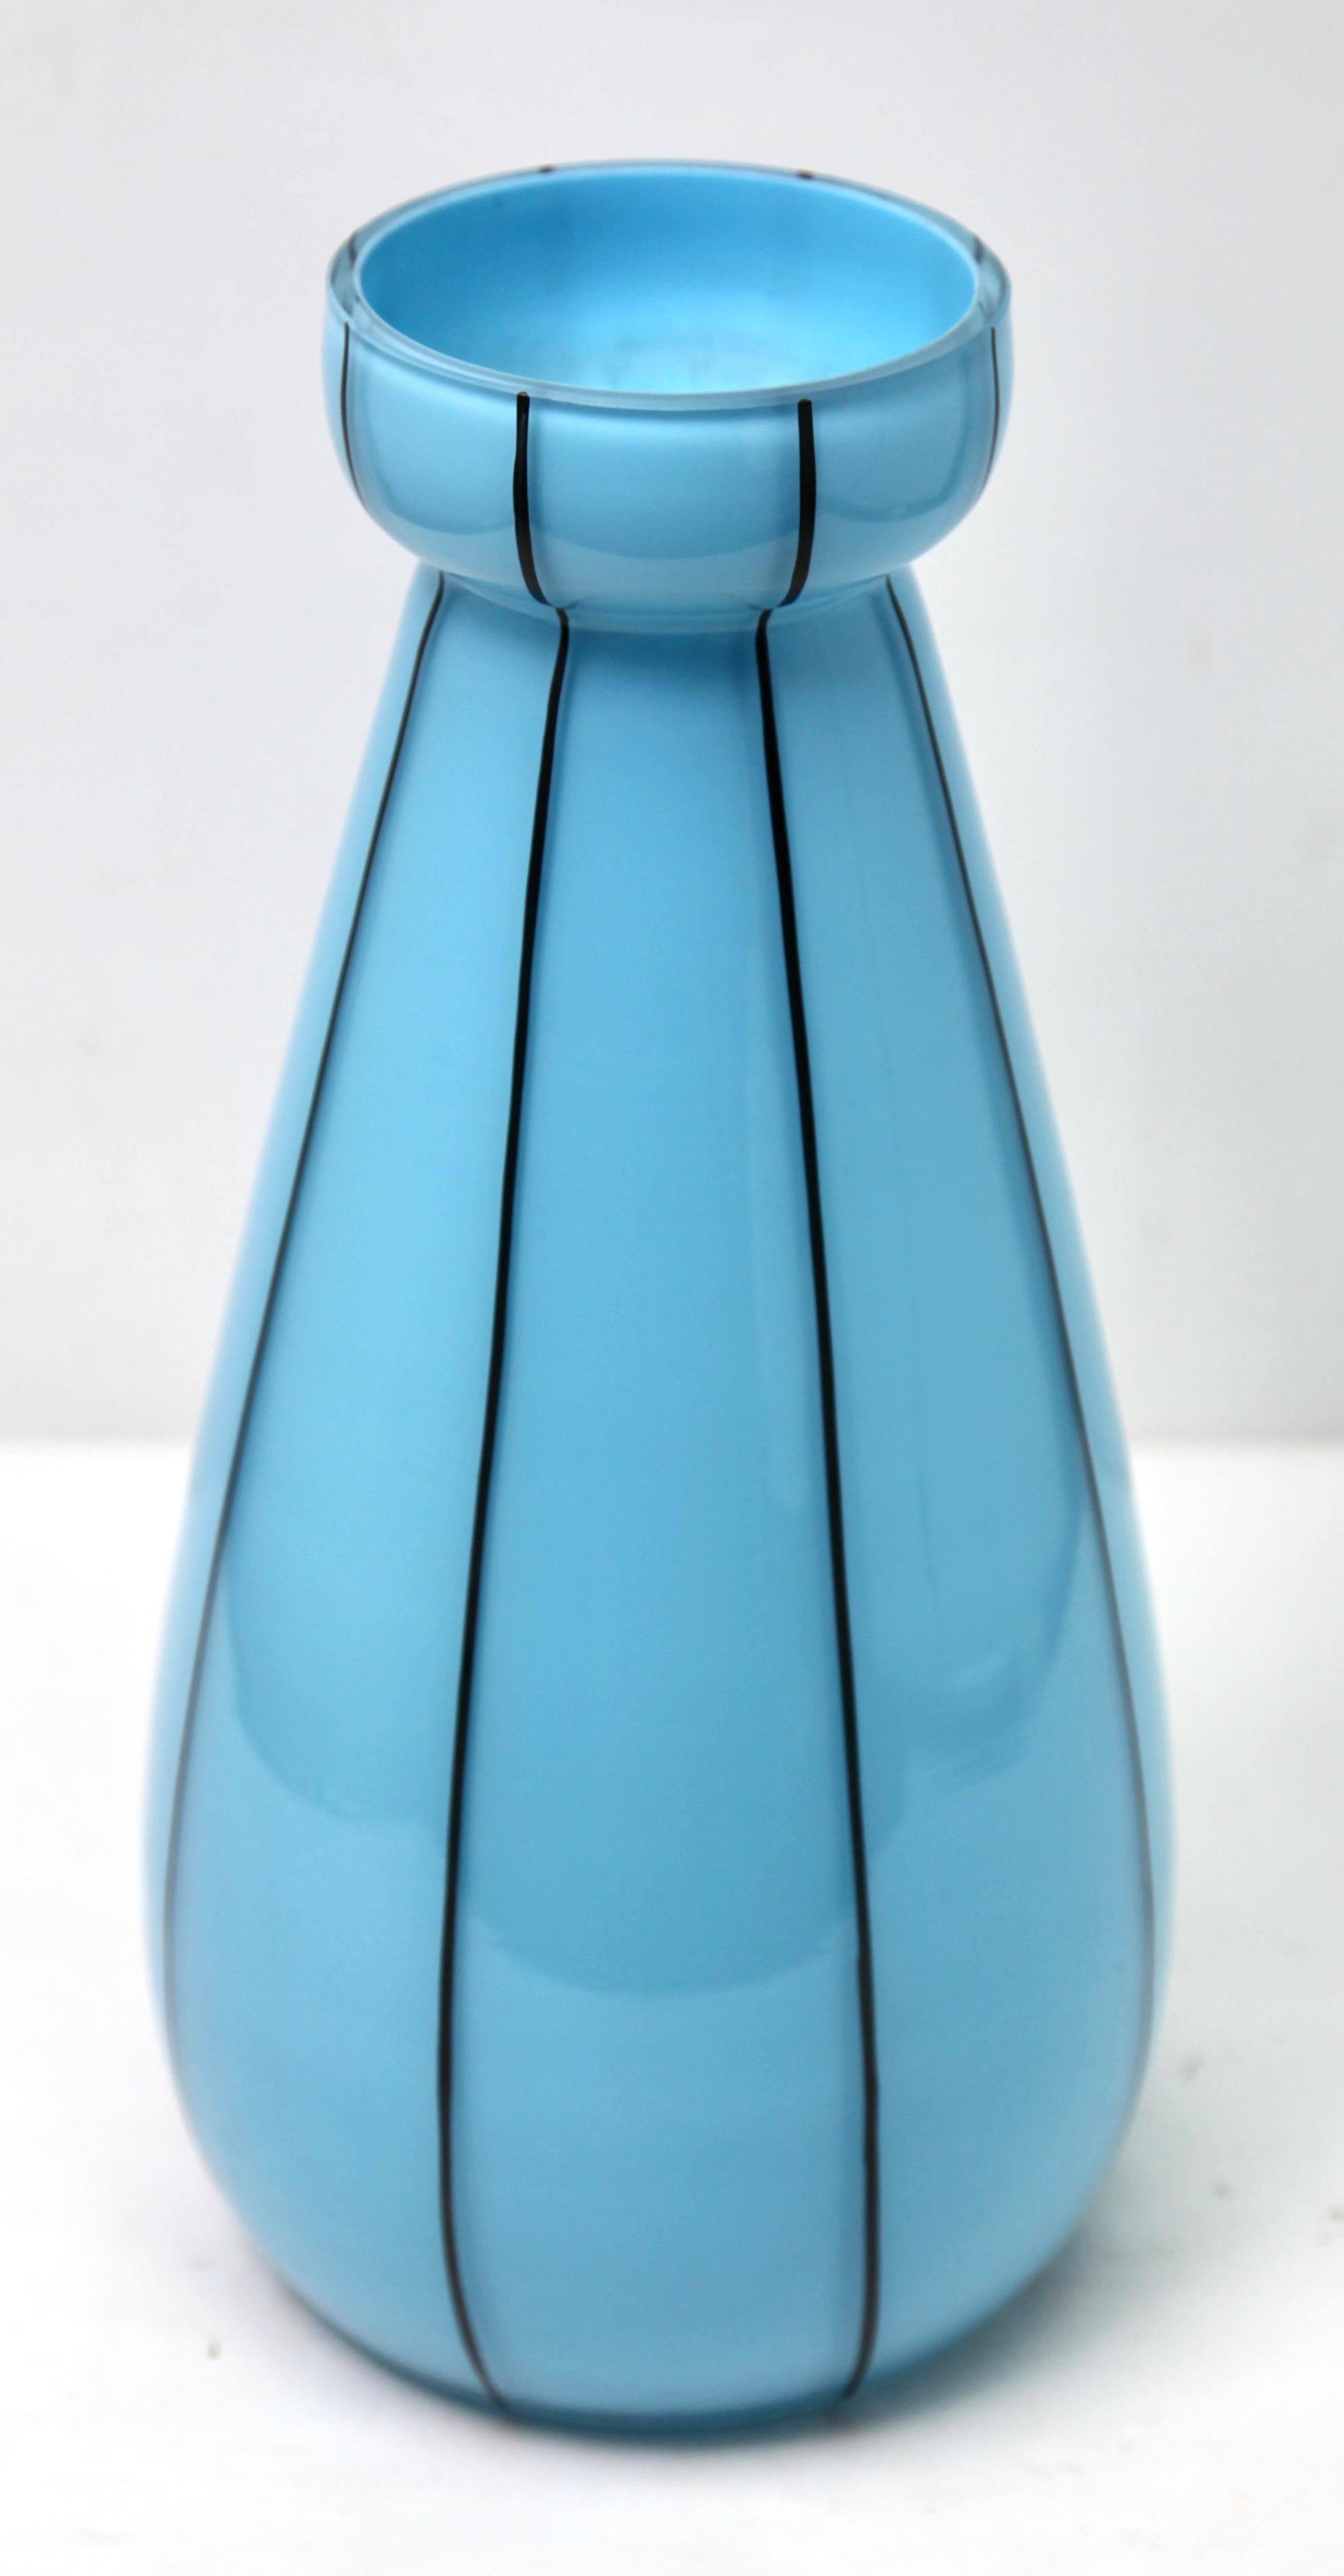 Opaline Glass 'hand painted decorated' Vases in Baby Blue, France In Good Condition For Sale In Verviers, BE